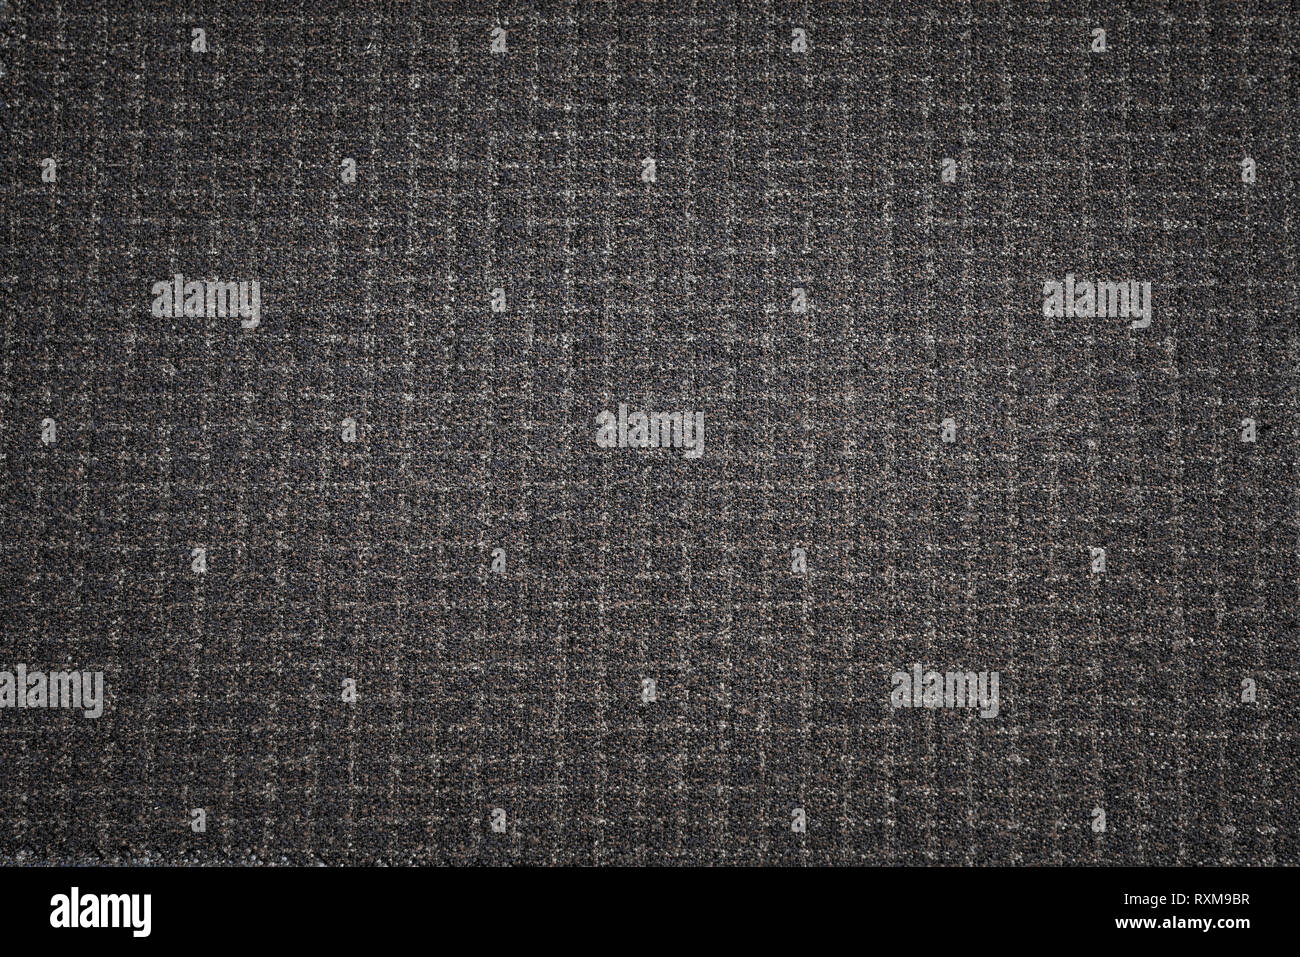 Black fabric texture background. Dark woven clothing material Stock Photo